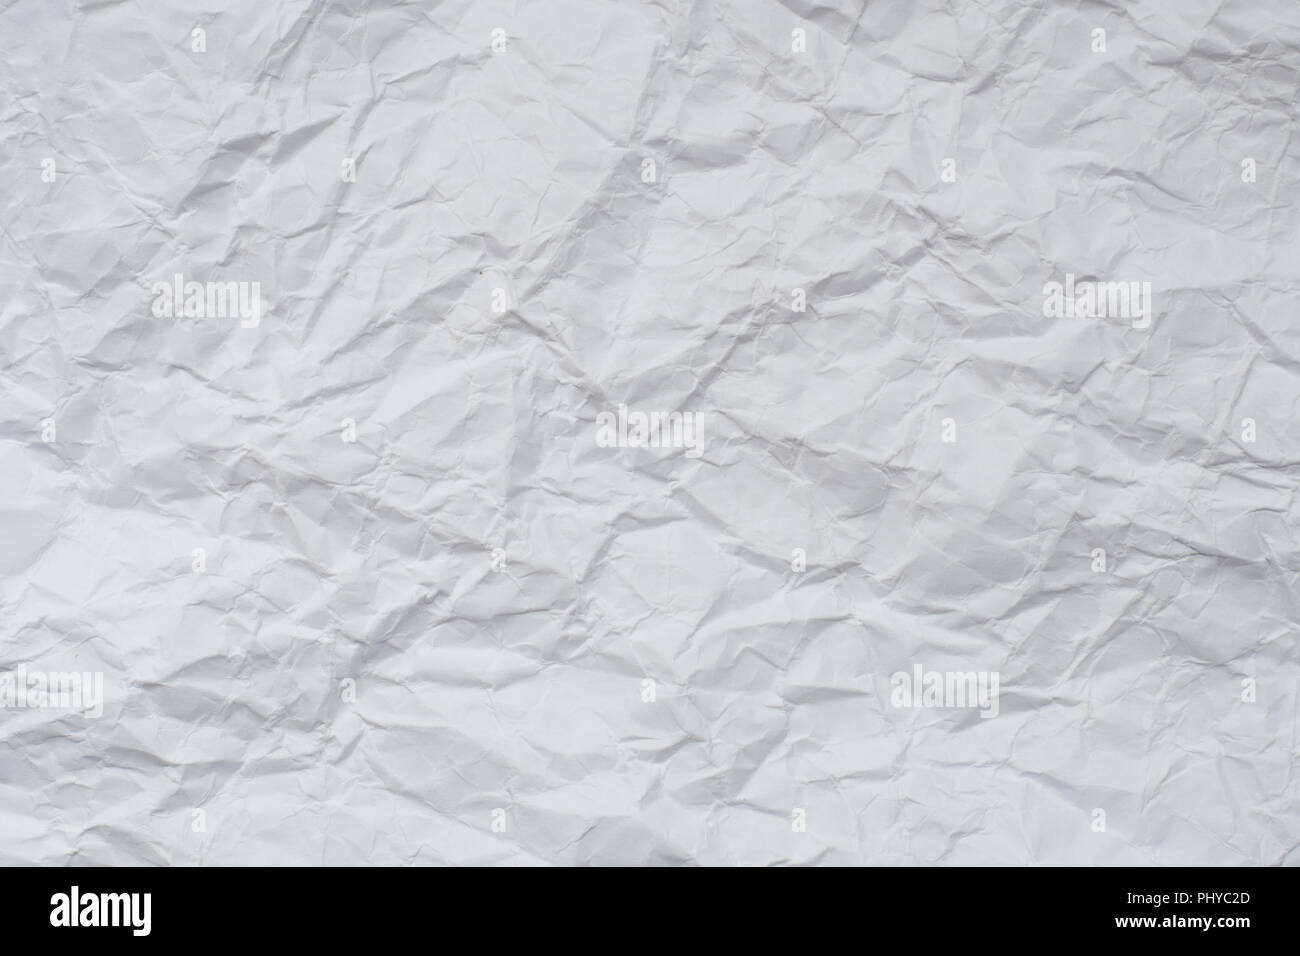 Paper texture. White crumpled paper background. Stock Photo